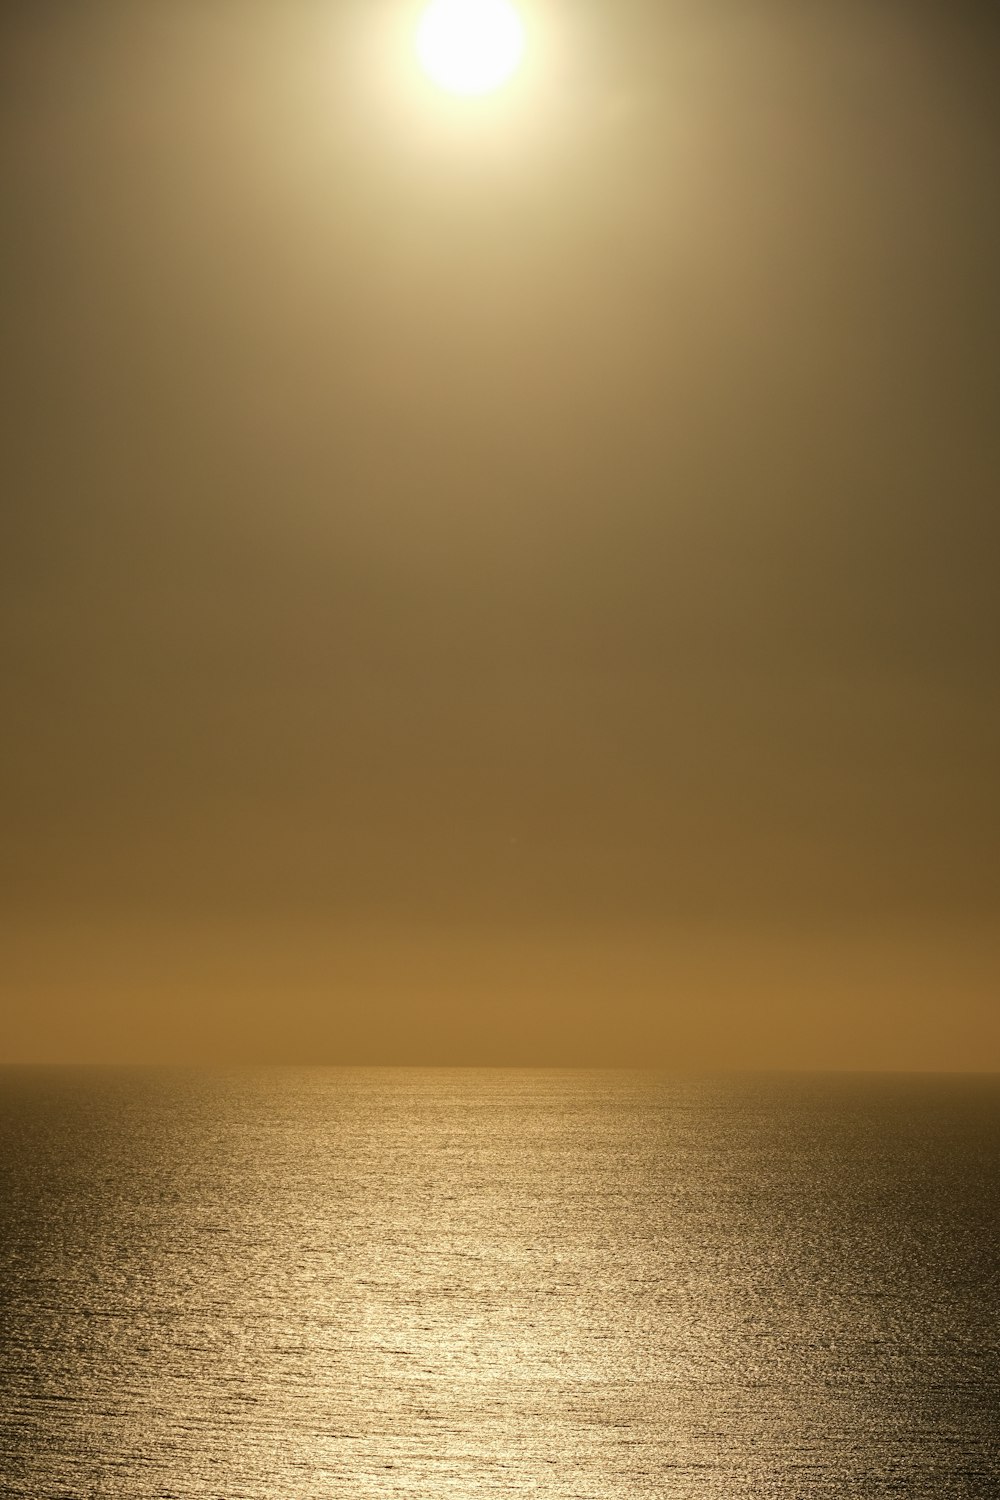 the sun is shining over the ocean on a hazy day